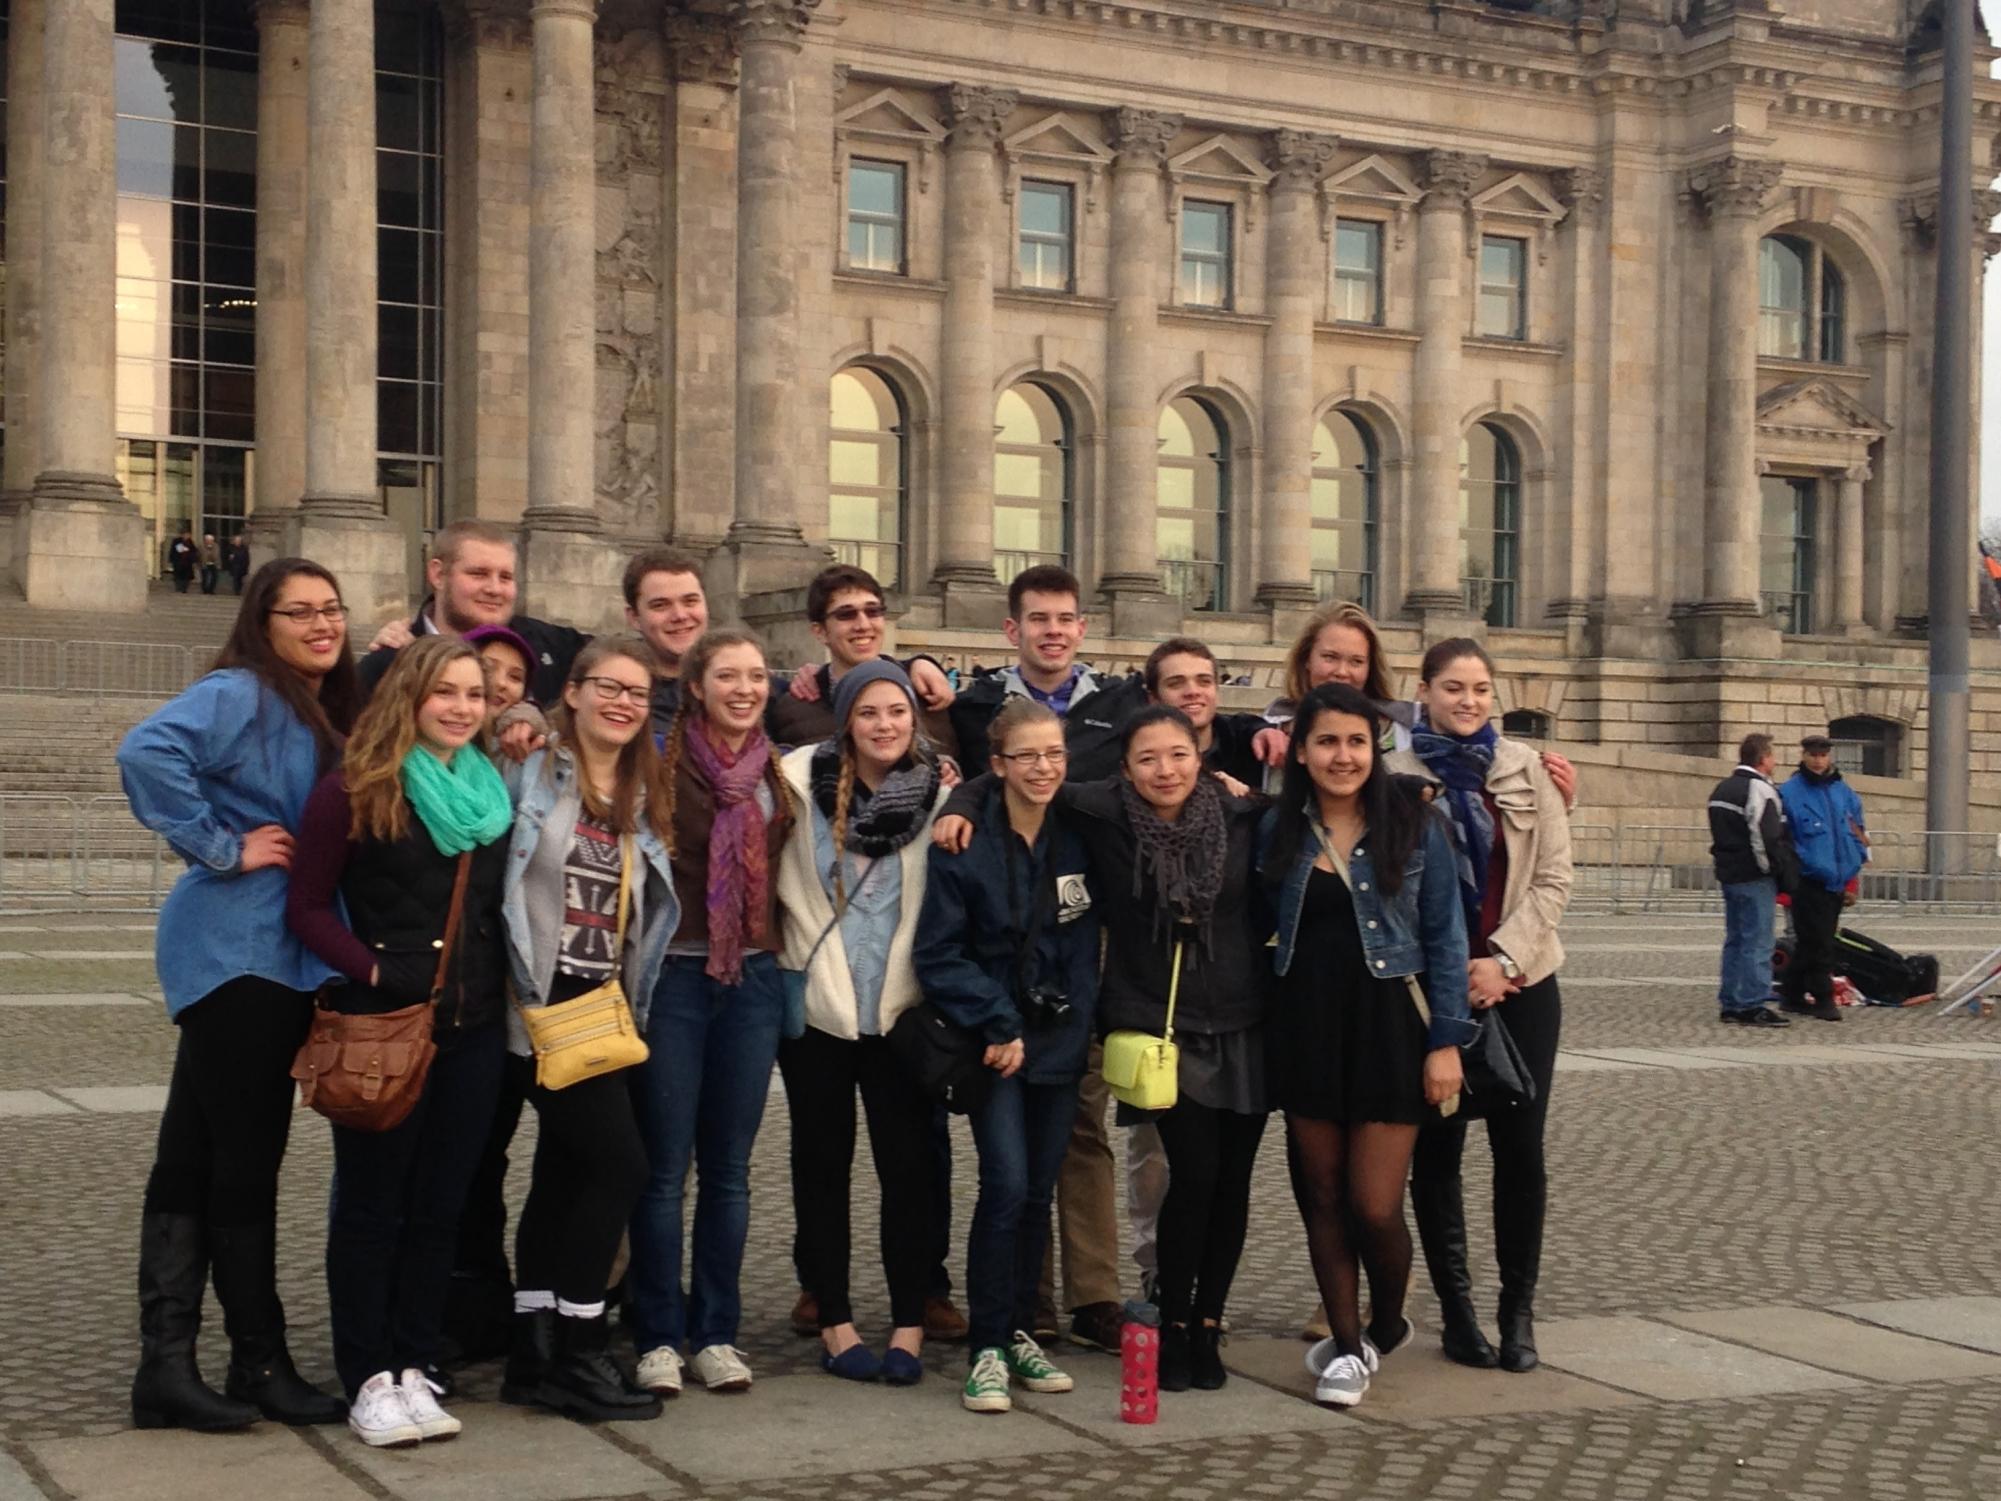 WURST. Students taking German visited Berlin and Hamburg in 2015, posing in front of Germanys capital building, der Reichstag, housing the legislative branch. Wurst means sausage in German and is similar to Americas say cheese when taking photos. Middle school German teacher Madeleine Flom-Staab said, While in Hamburg, we stayed with our exchange partners who had come to visit us in Minnesota in October of 2014. (Submitted photo by Madeleine Flom-Staab)